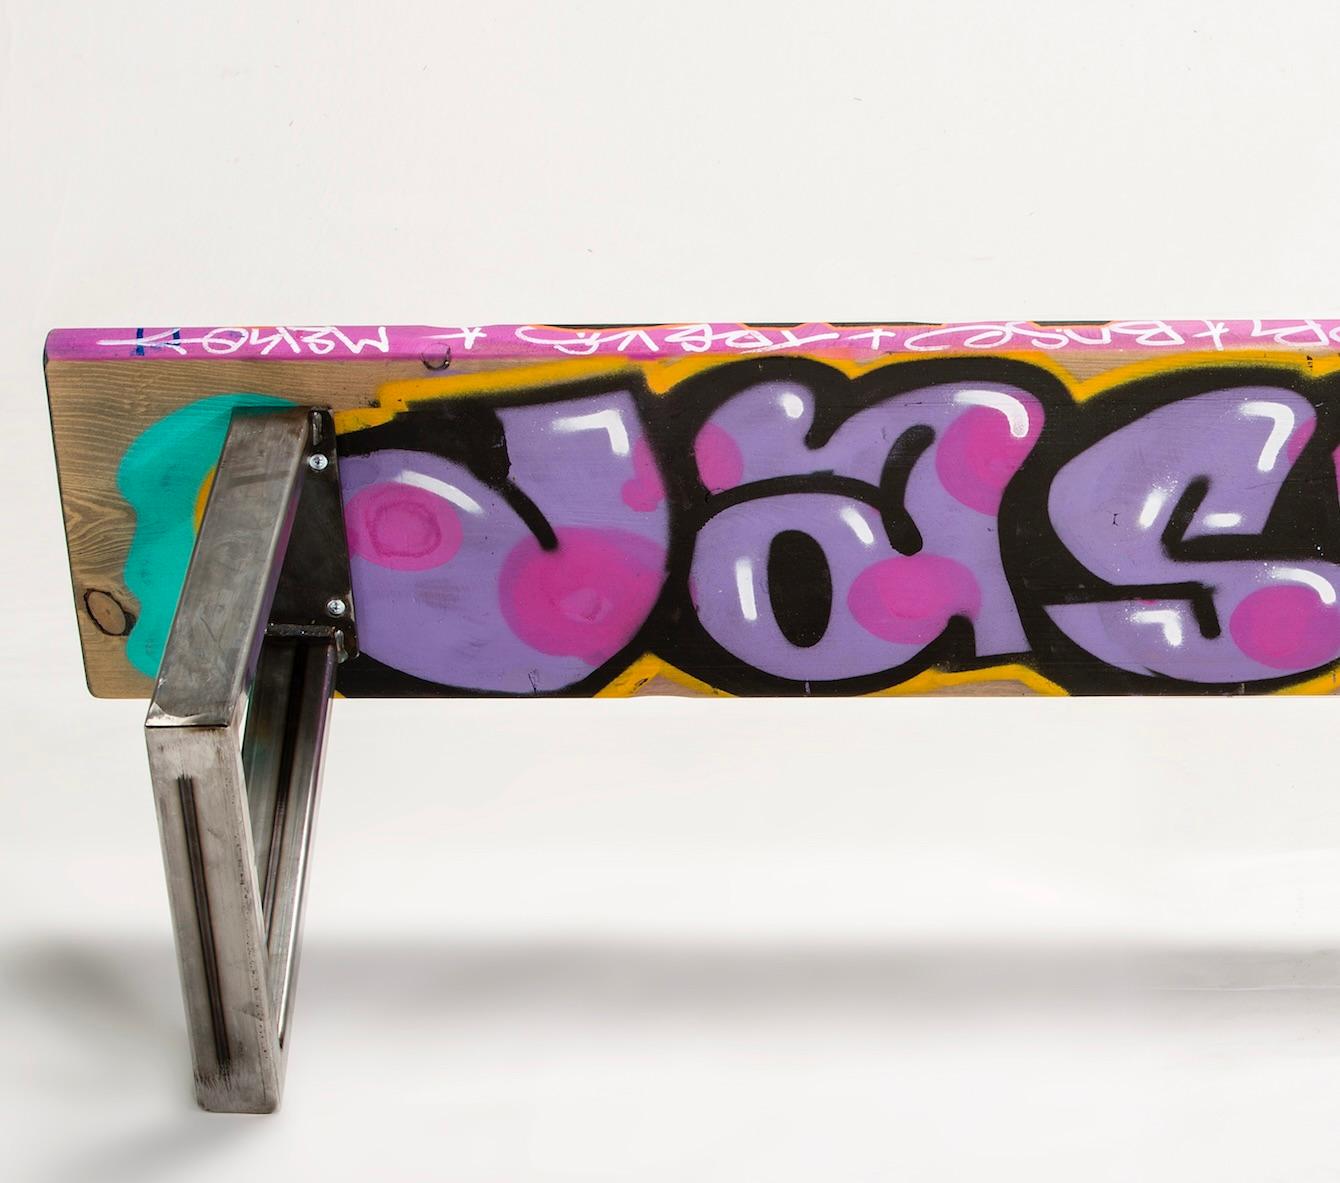 Steel Small Colorful Graffiti Tagged Wood Bench 